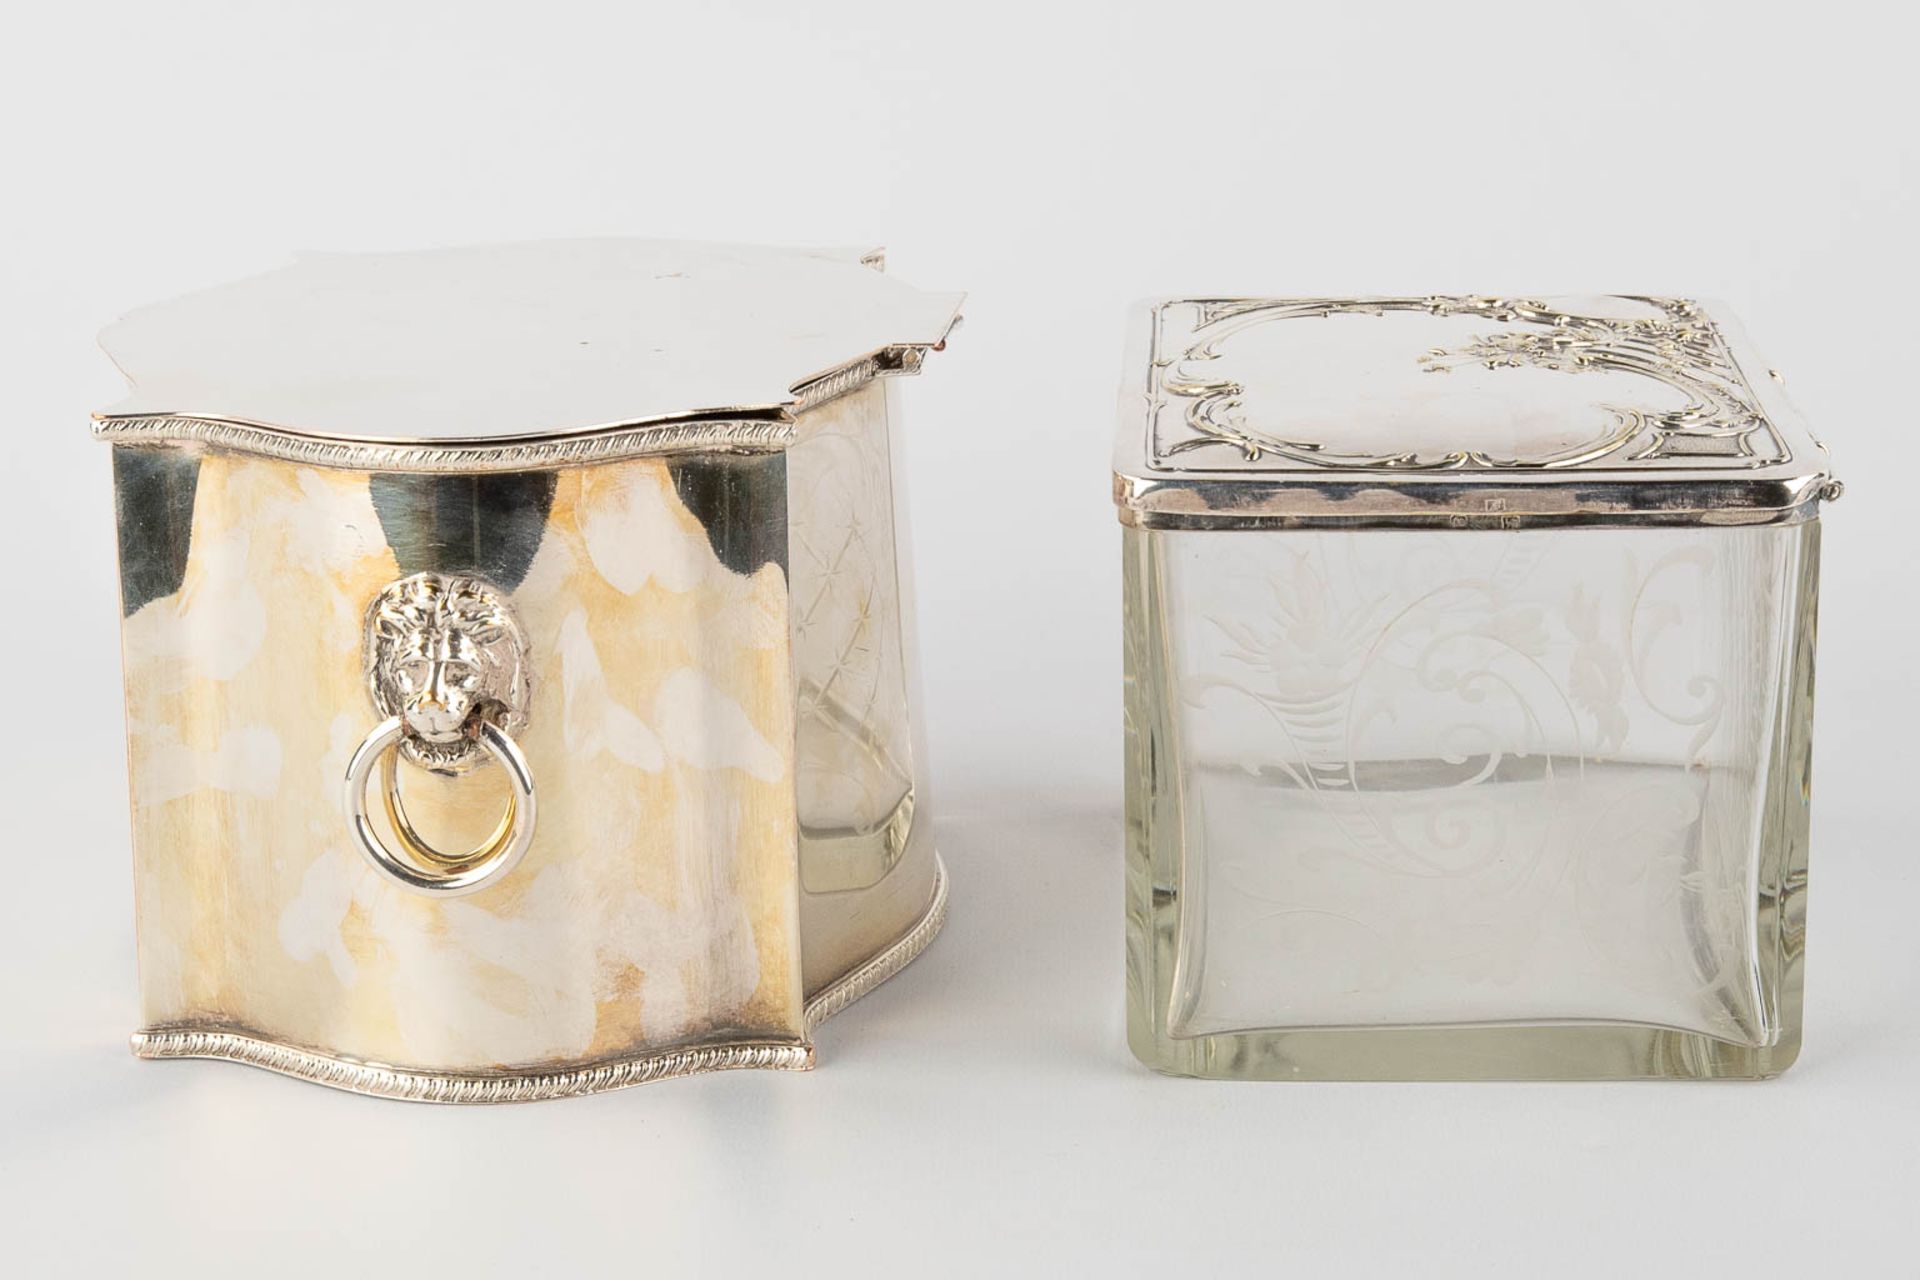 Four silver-plated storage boxes, ice-pails. (H:27 x D:20 cm) - Image 15 of 20